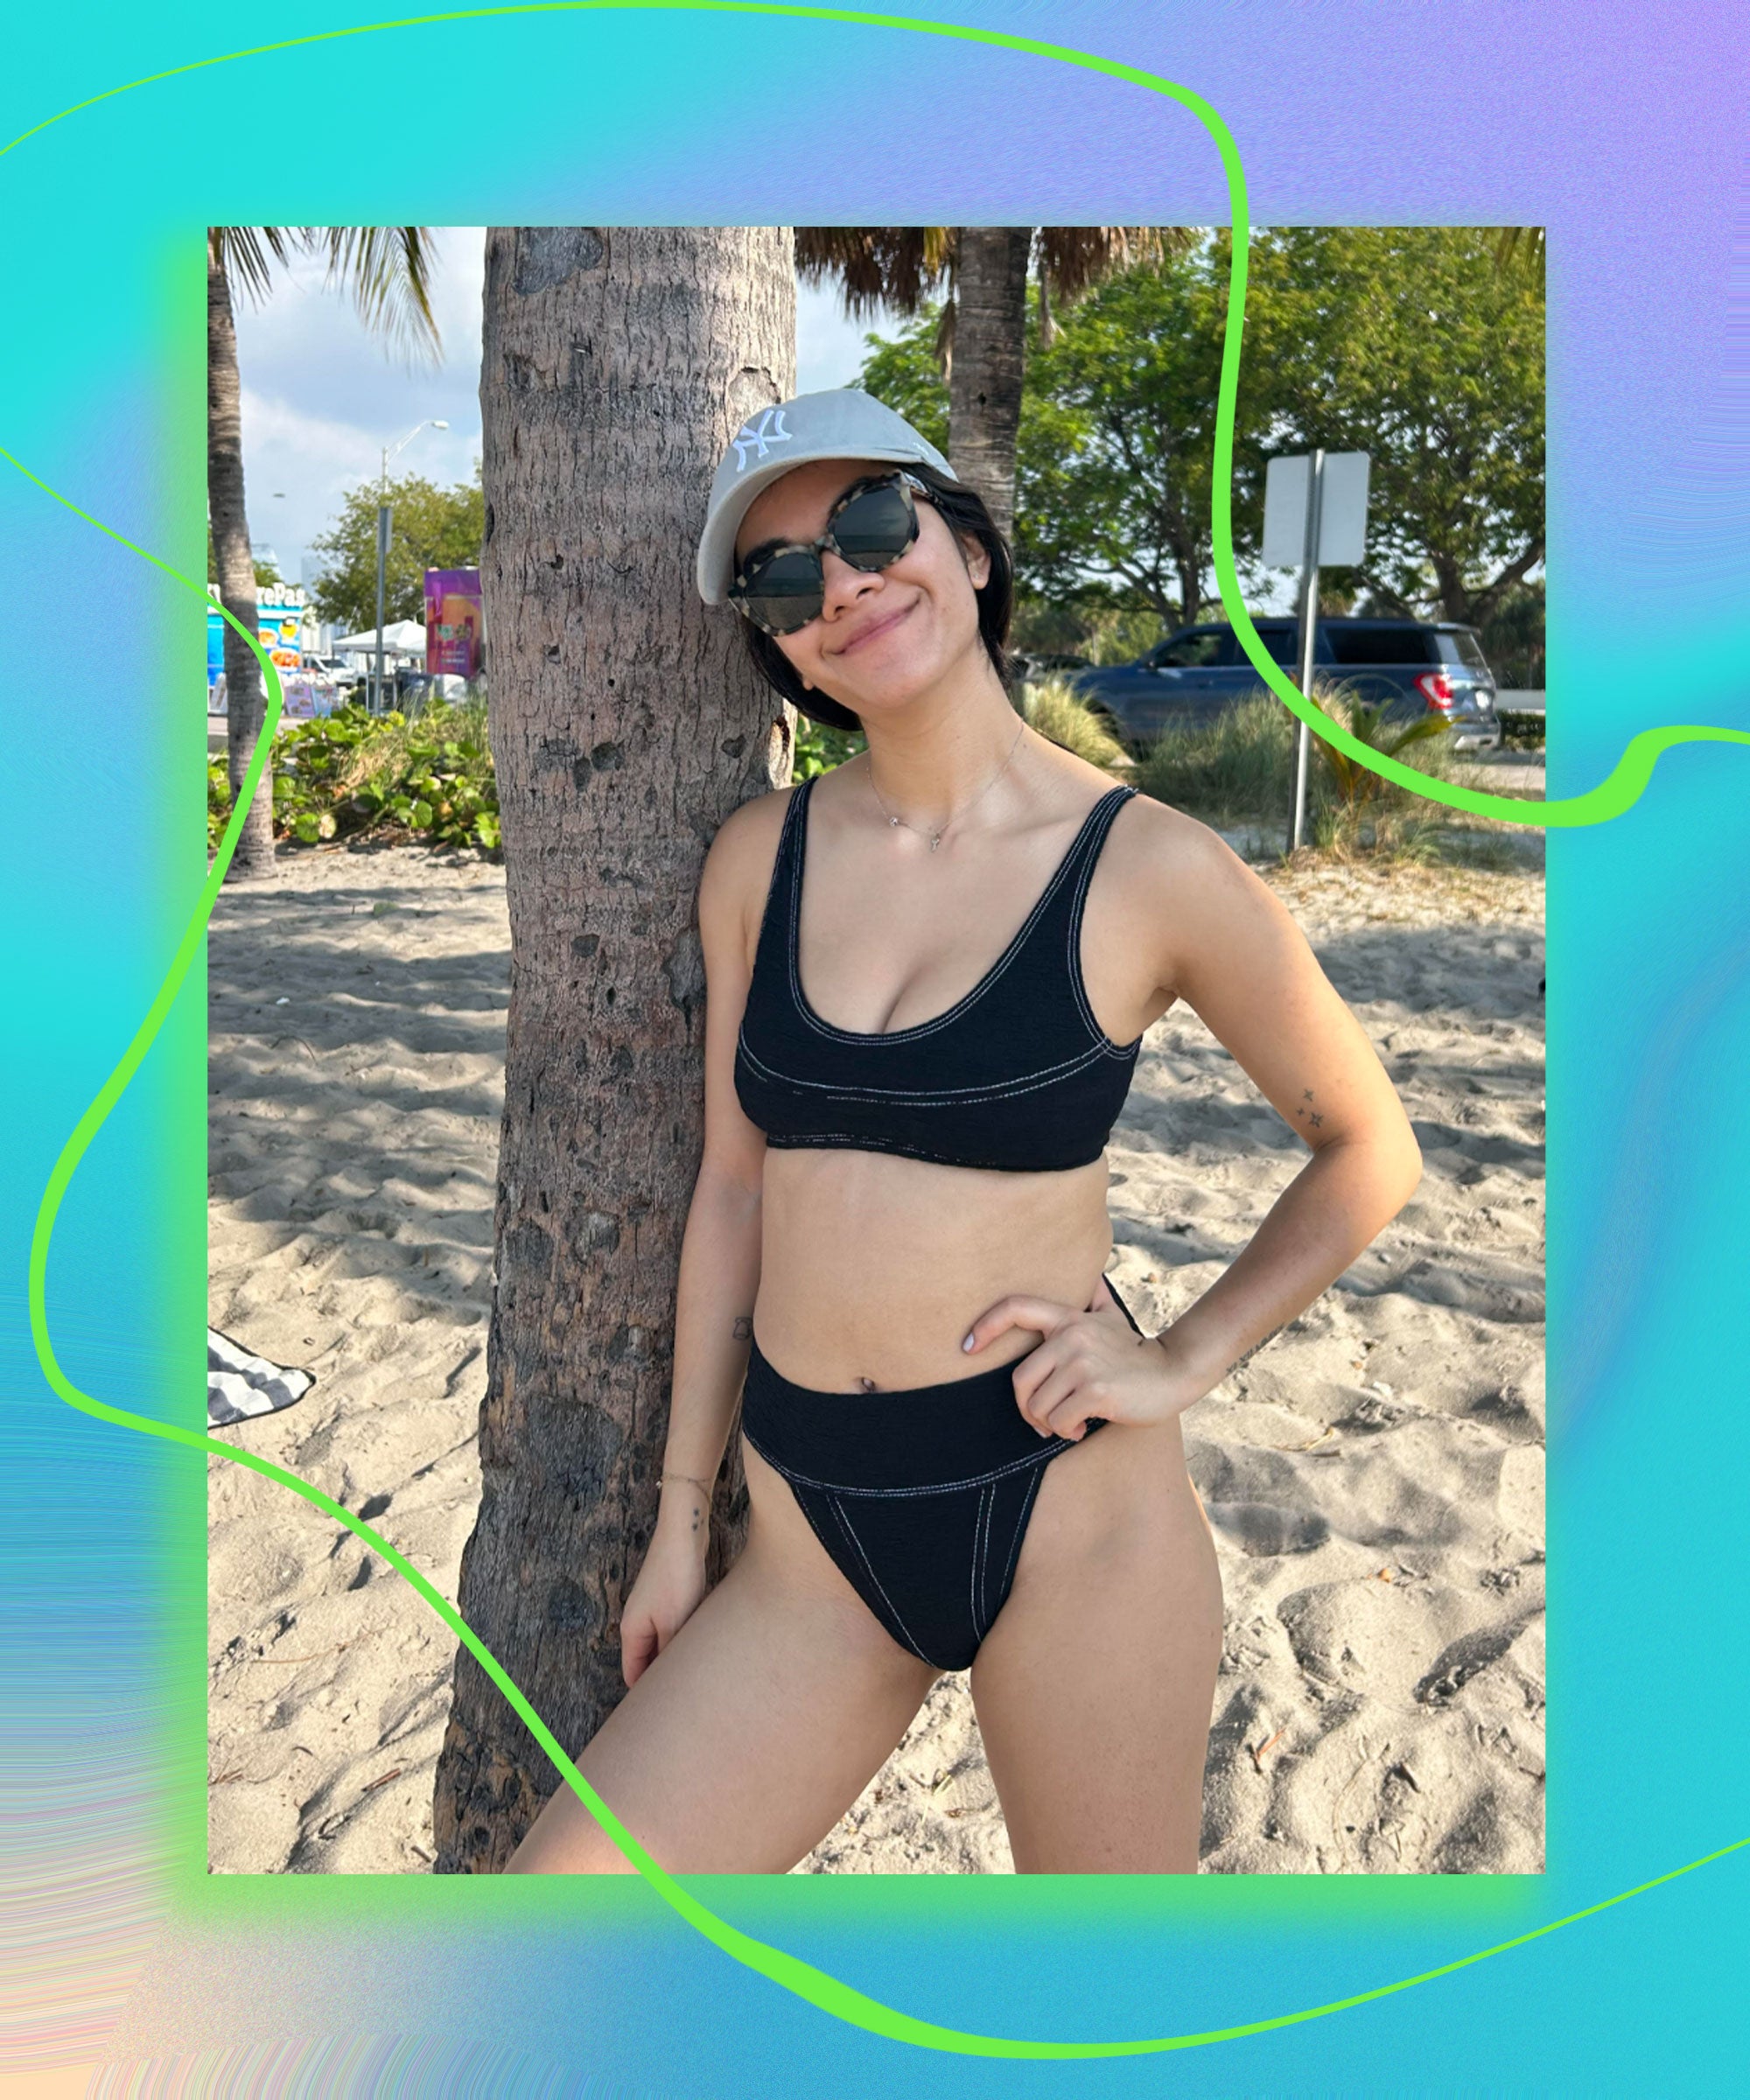 R29 Editors Review New Free People Swim Pieces pic picture